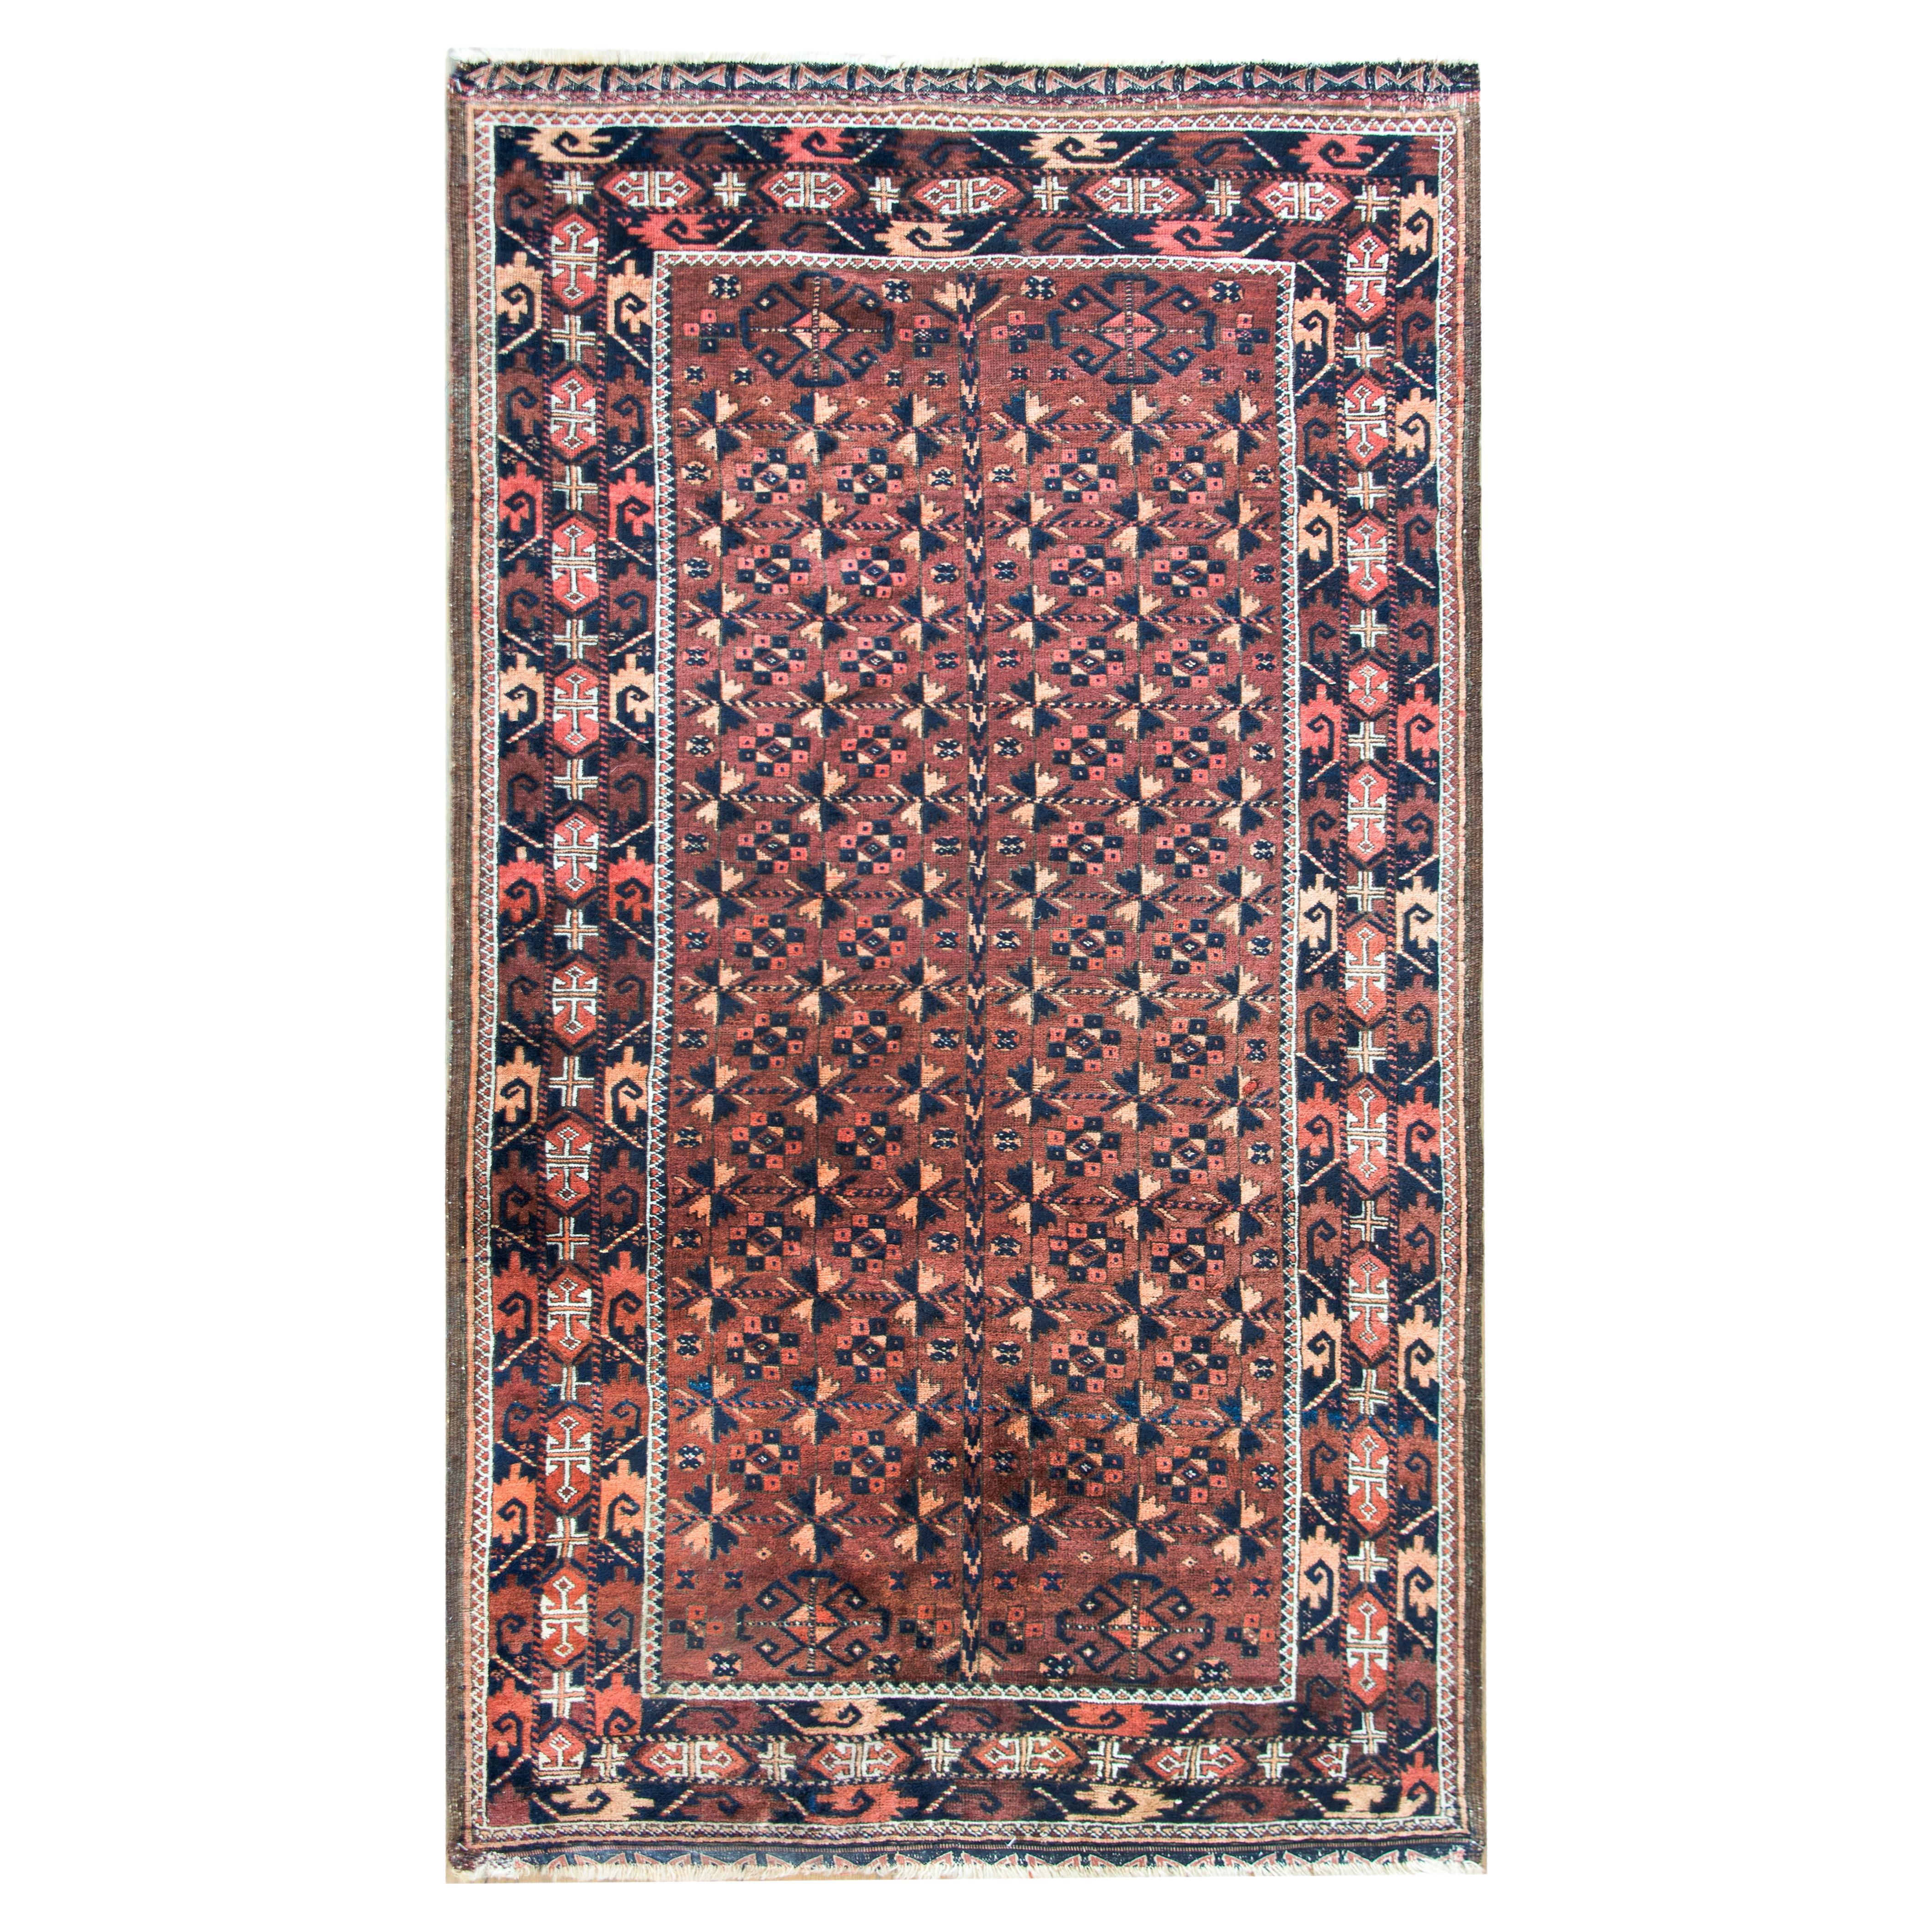 Early 20th Century Persian Baluch Rug